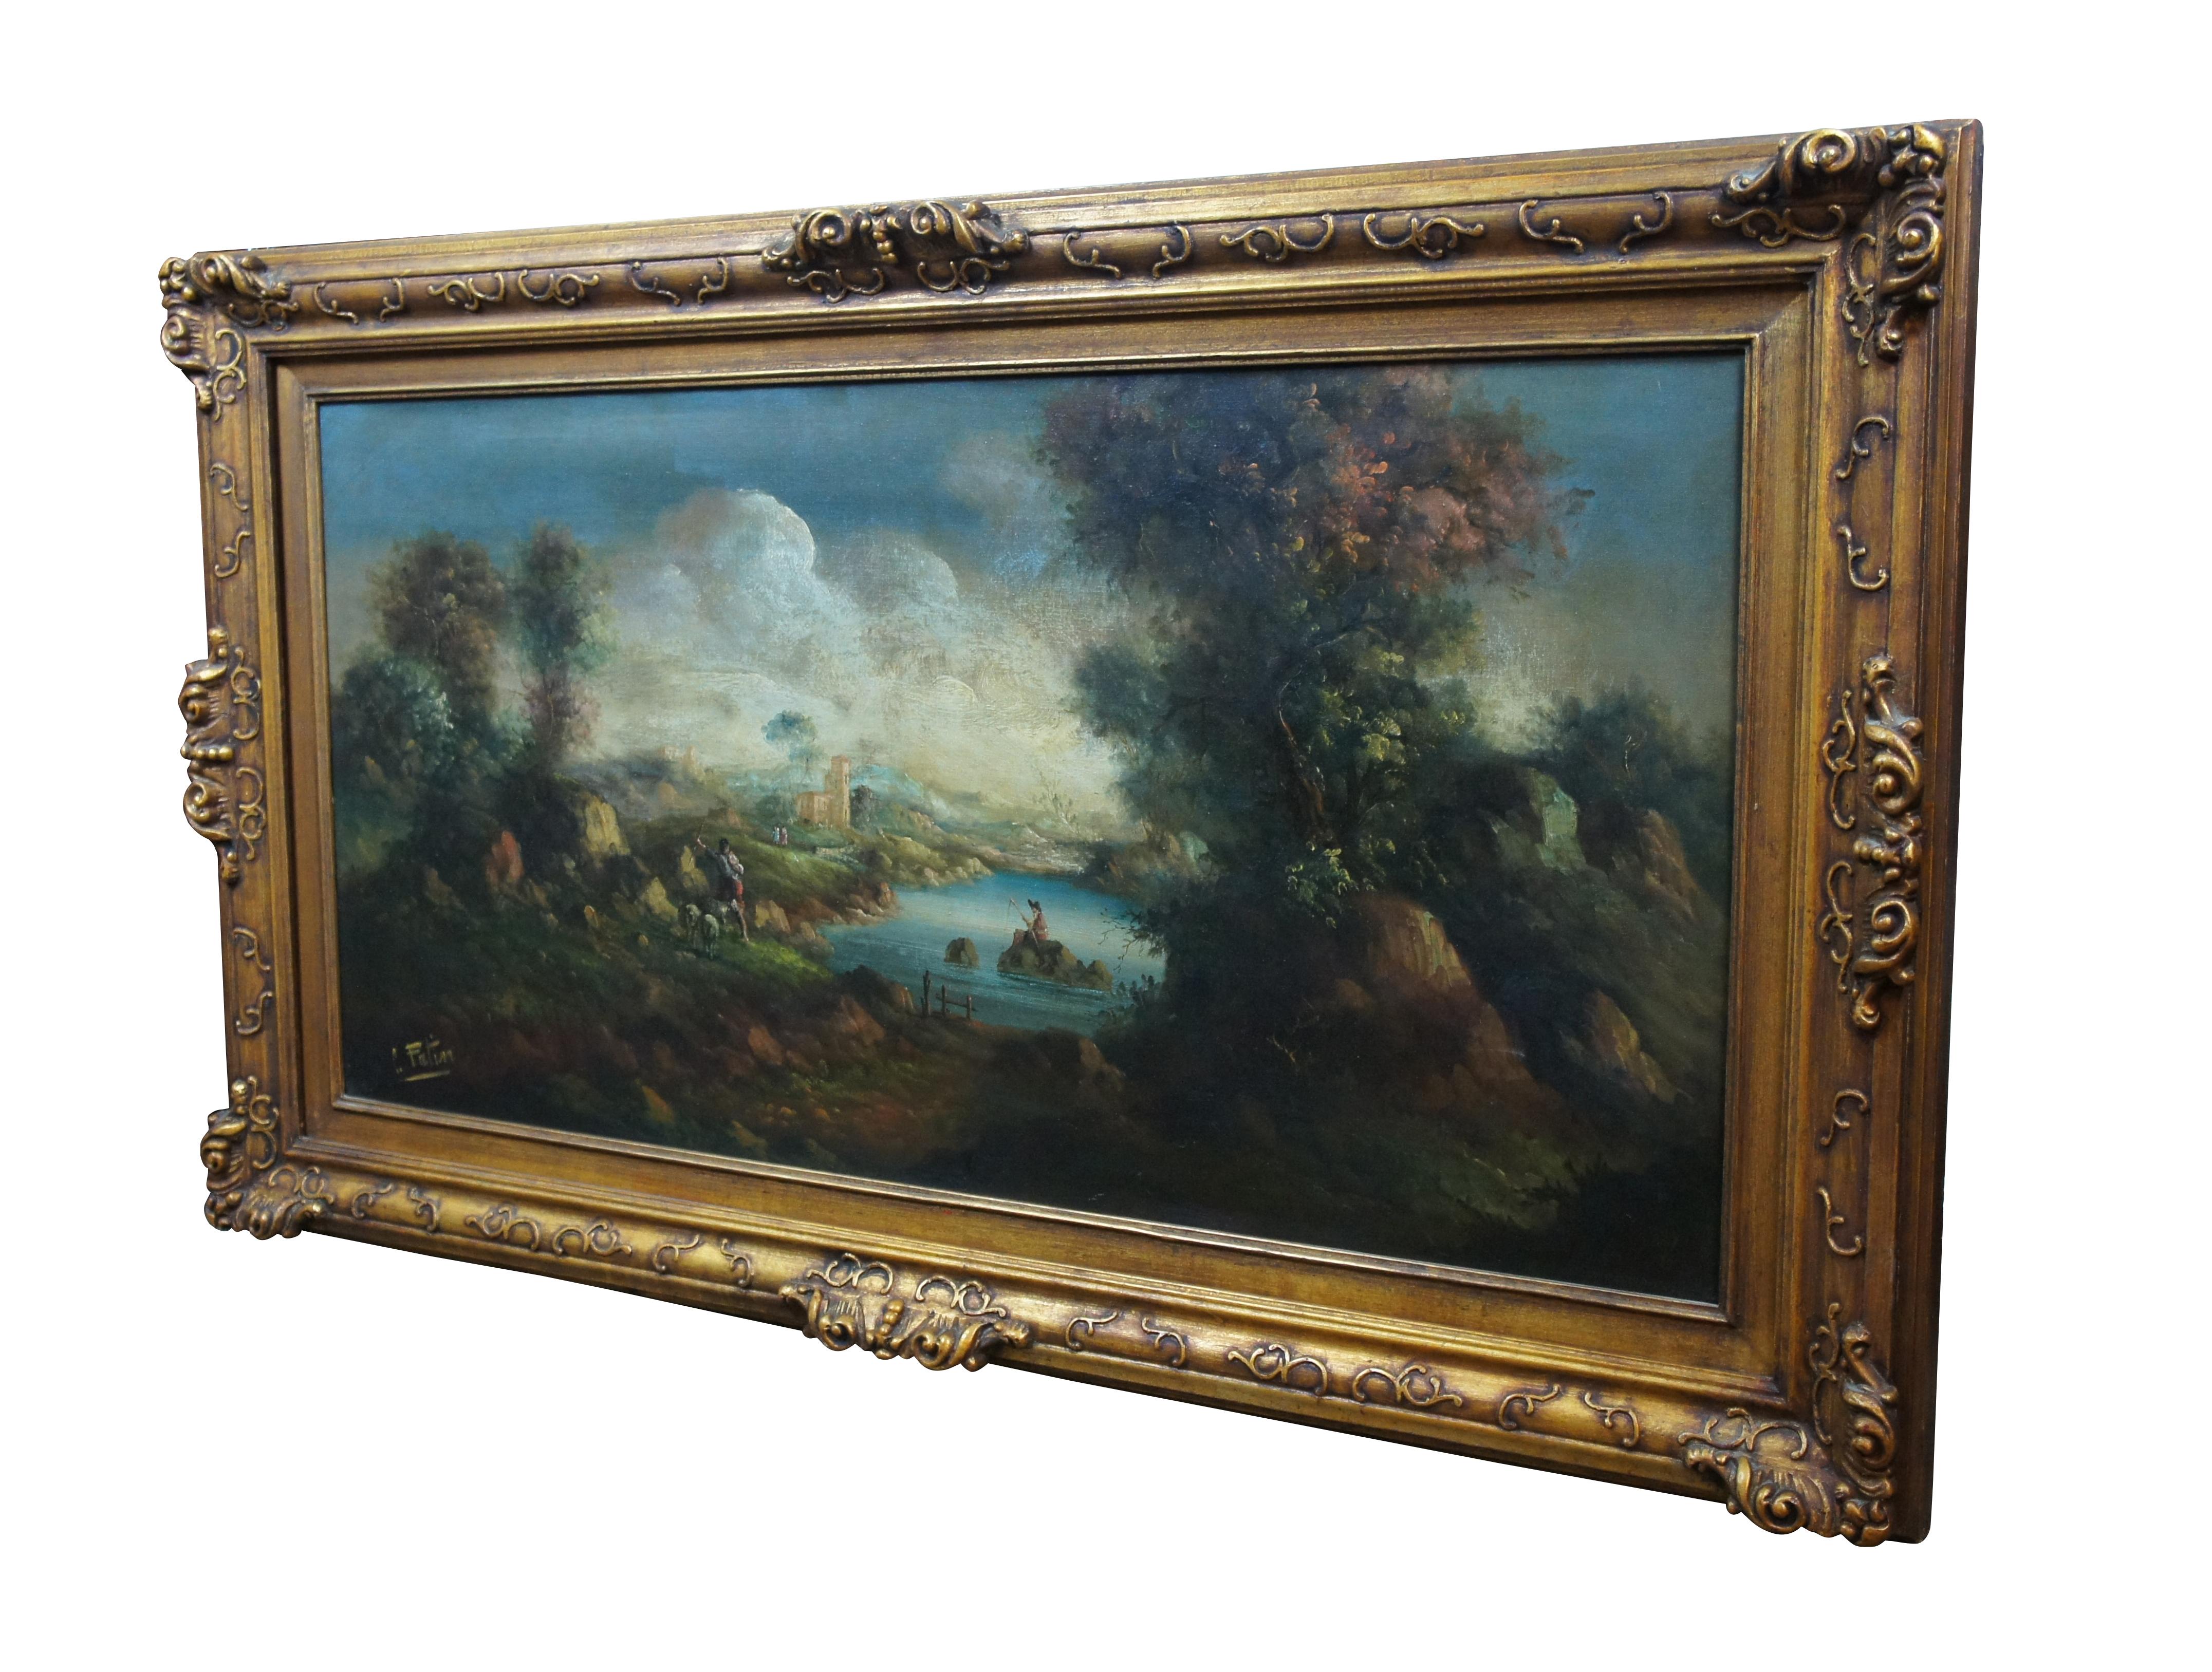 Vintage French Old World / Renaissance style oil painting on canvas showing a sweeping landscape, a shepherd, a man fishing on a lake, and a pair of figures by a distant stone castle. After Louis Joseph Alphonse Patin. Giltwood frame with carved